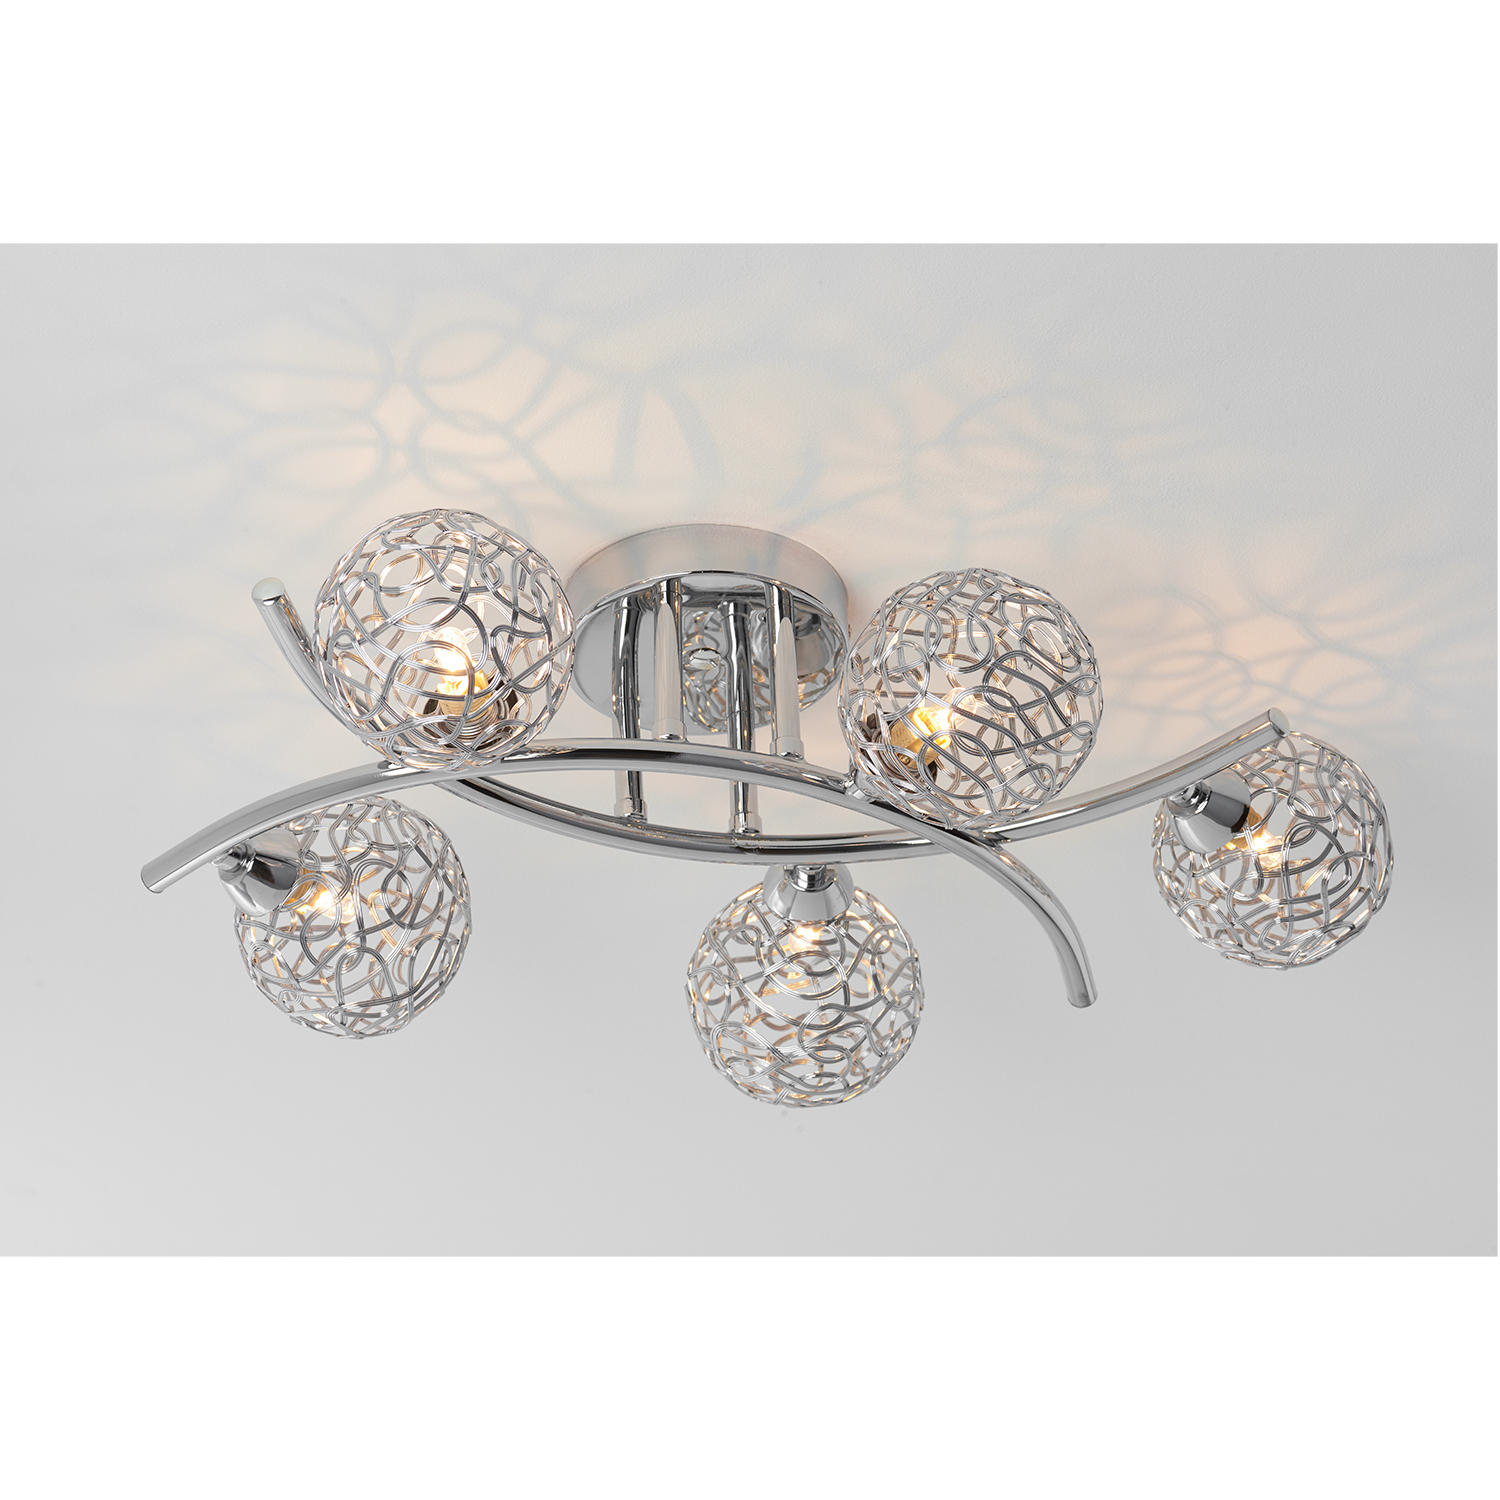 Silver 5 Sphere Electrical Fitting Ceiling Light Image 2